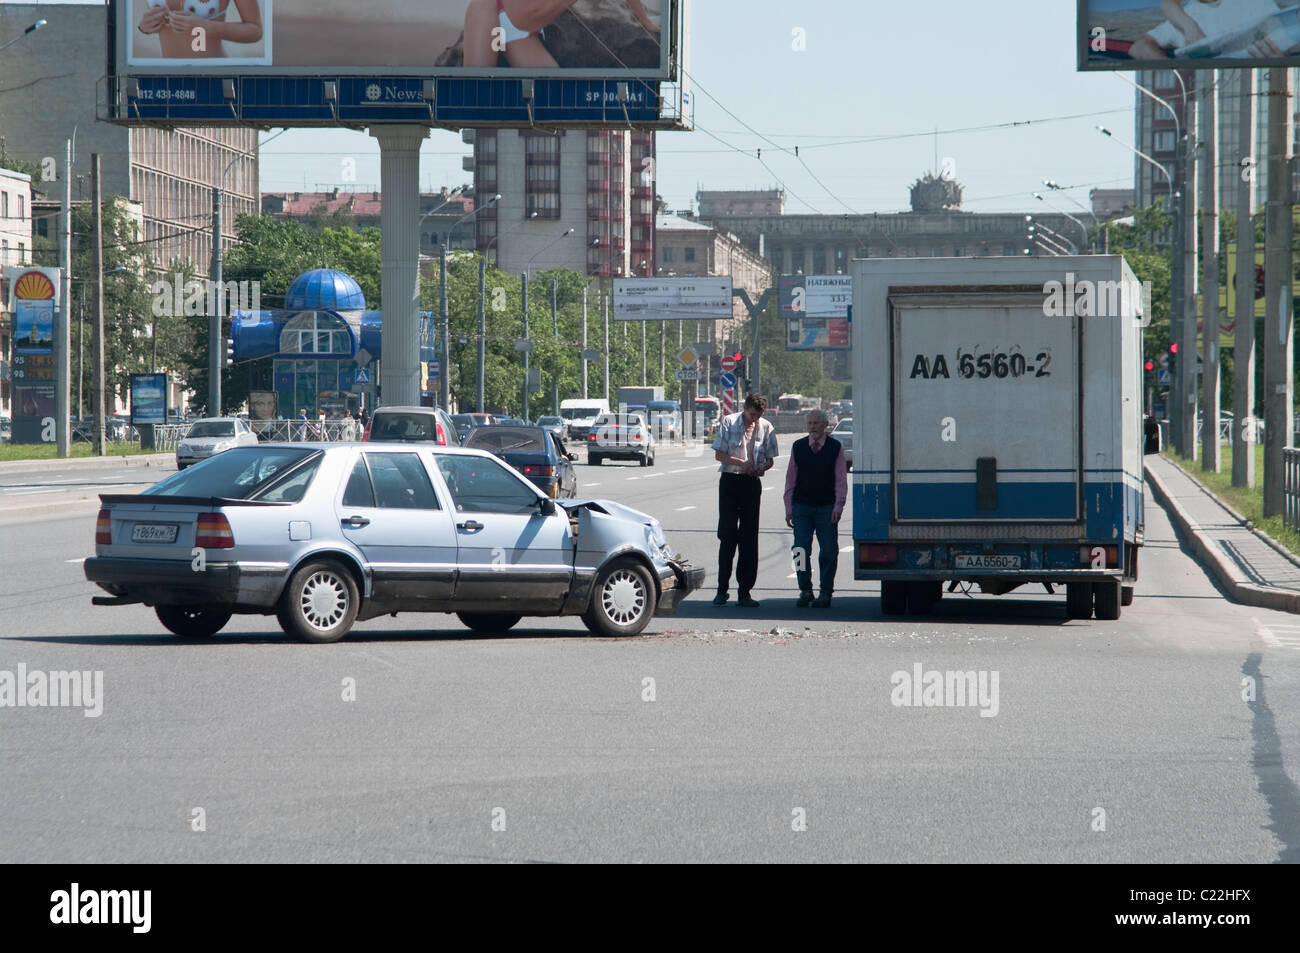 Car accident on the road, two vehicles collided, drivers looking at damage. Saint-Petersburg, Russia Stock Photo